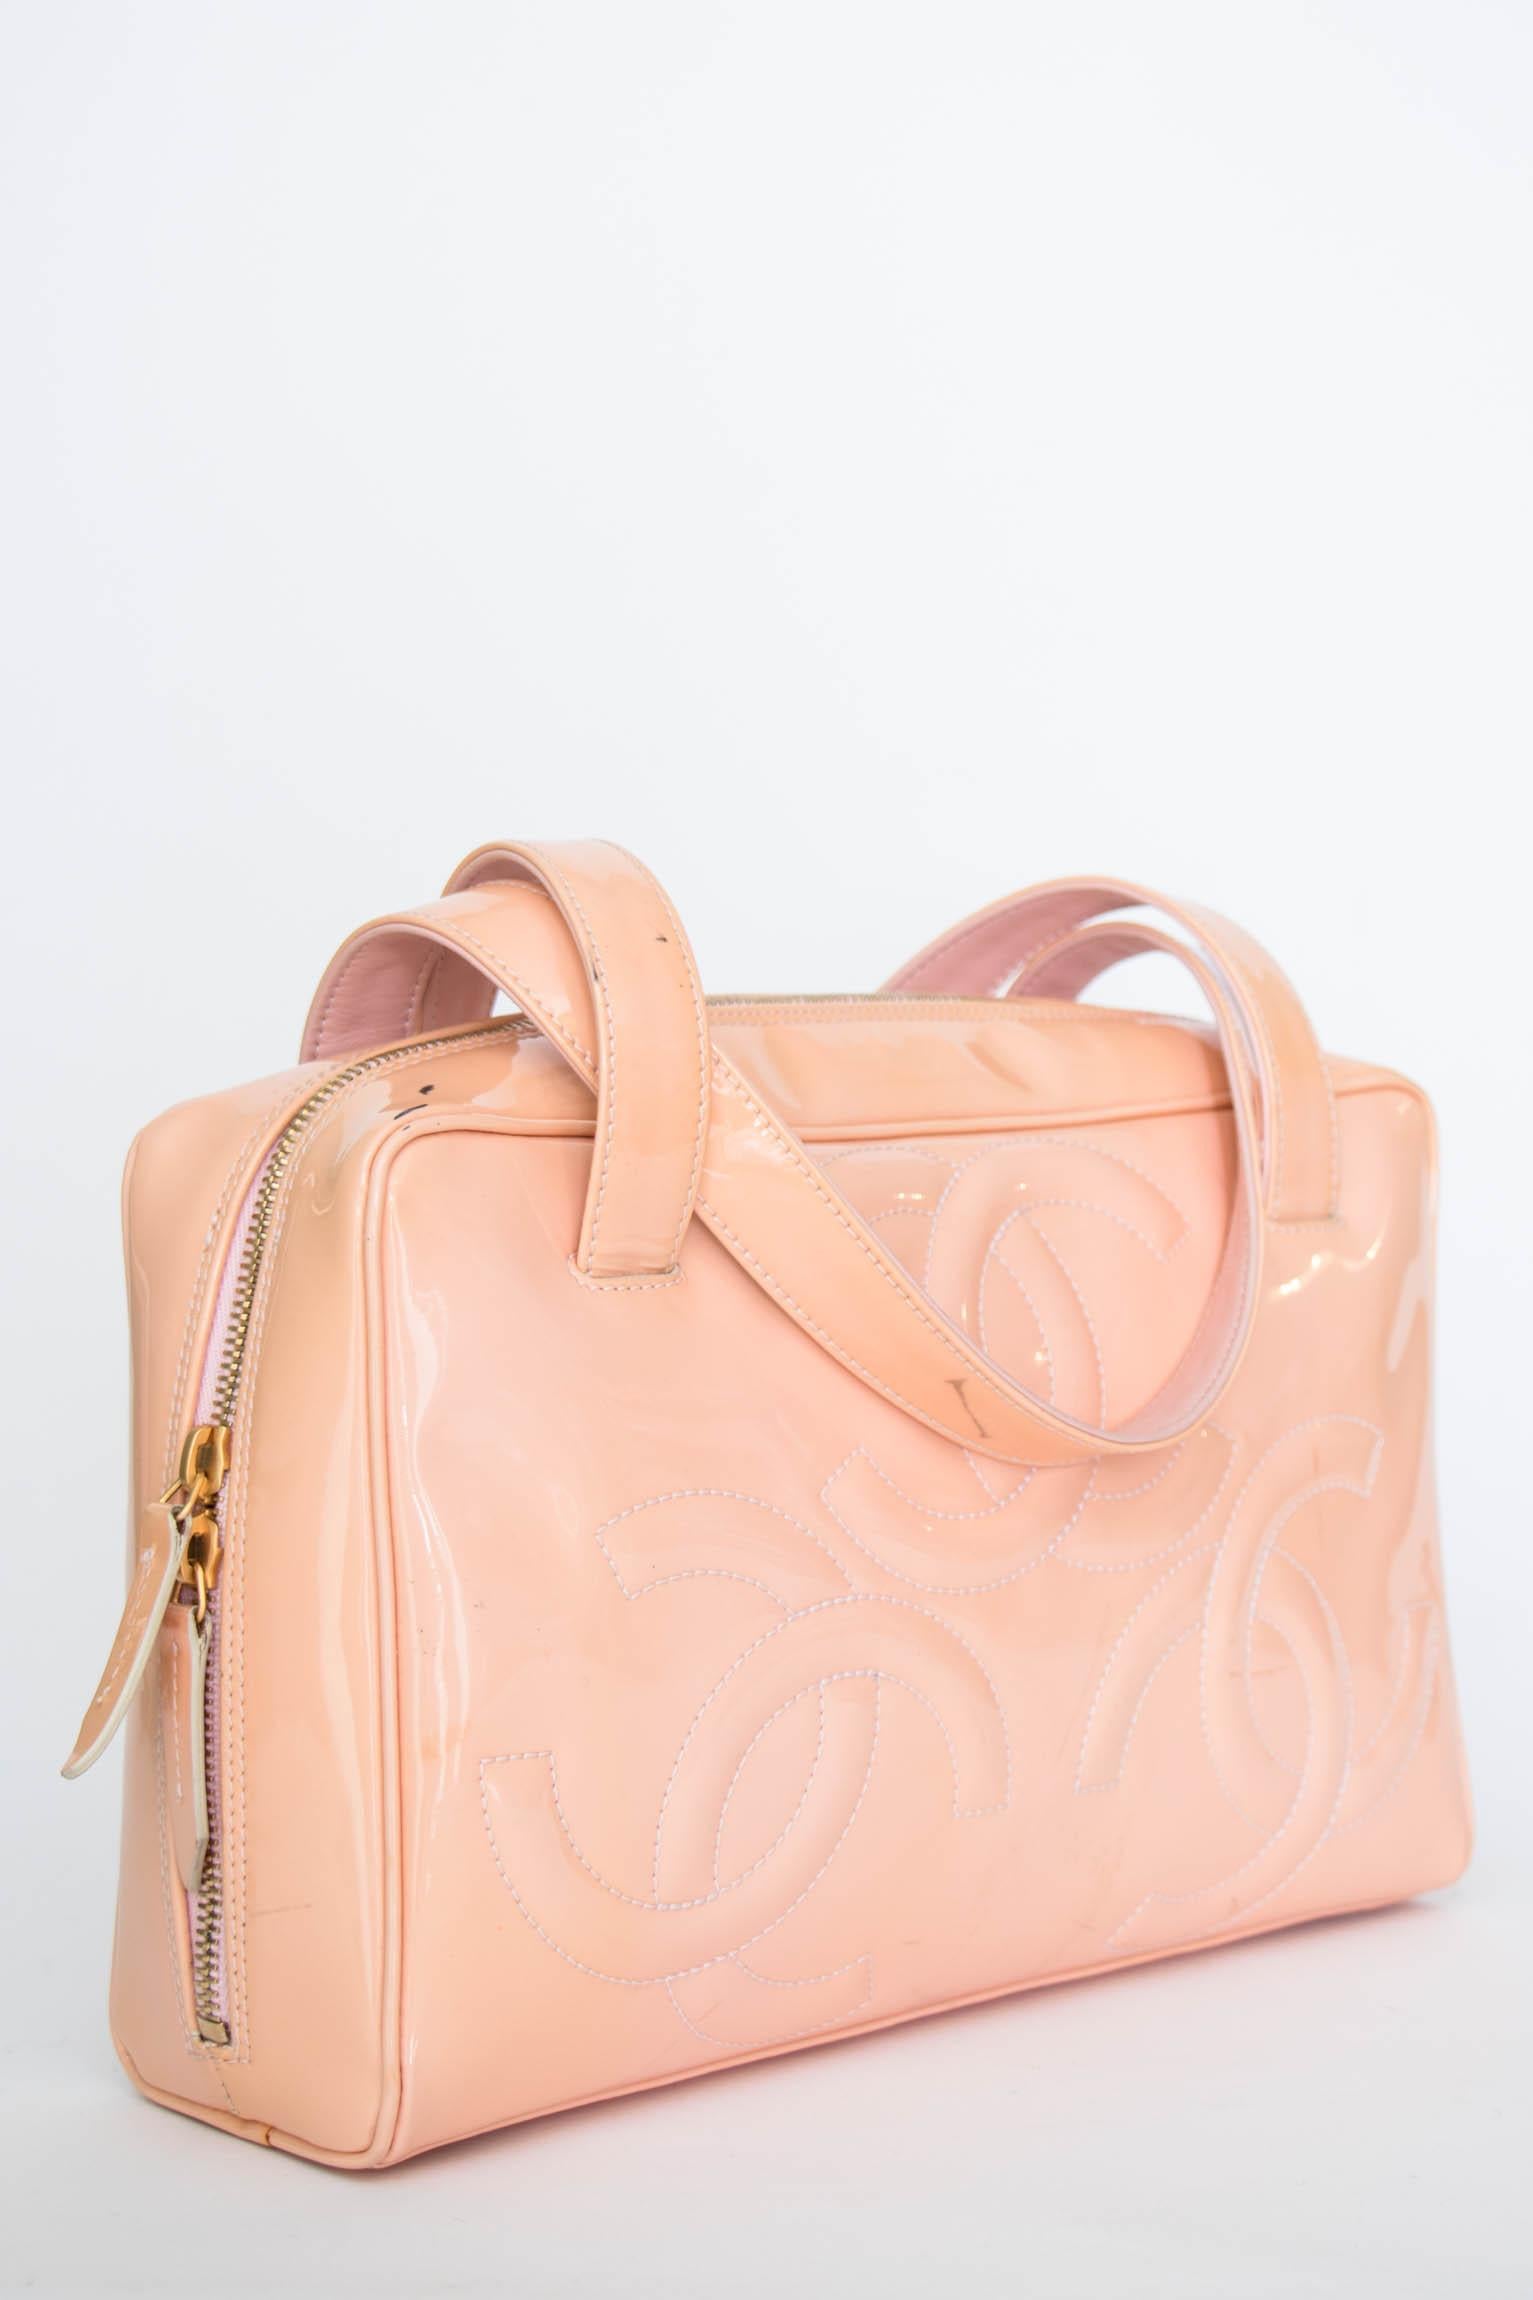 A fabulous 1990s pink Chanel patent leather handbag with a zipper closure, one large compartment and a small inside pocket. The characteristic double 'c' logo is embroidered onto the sides. 